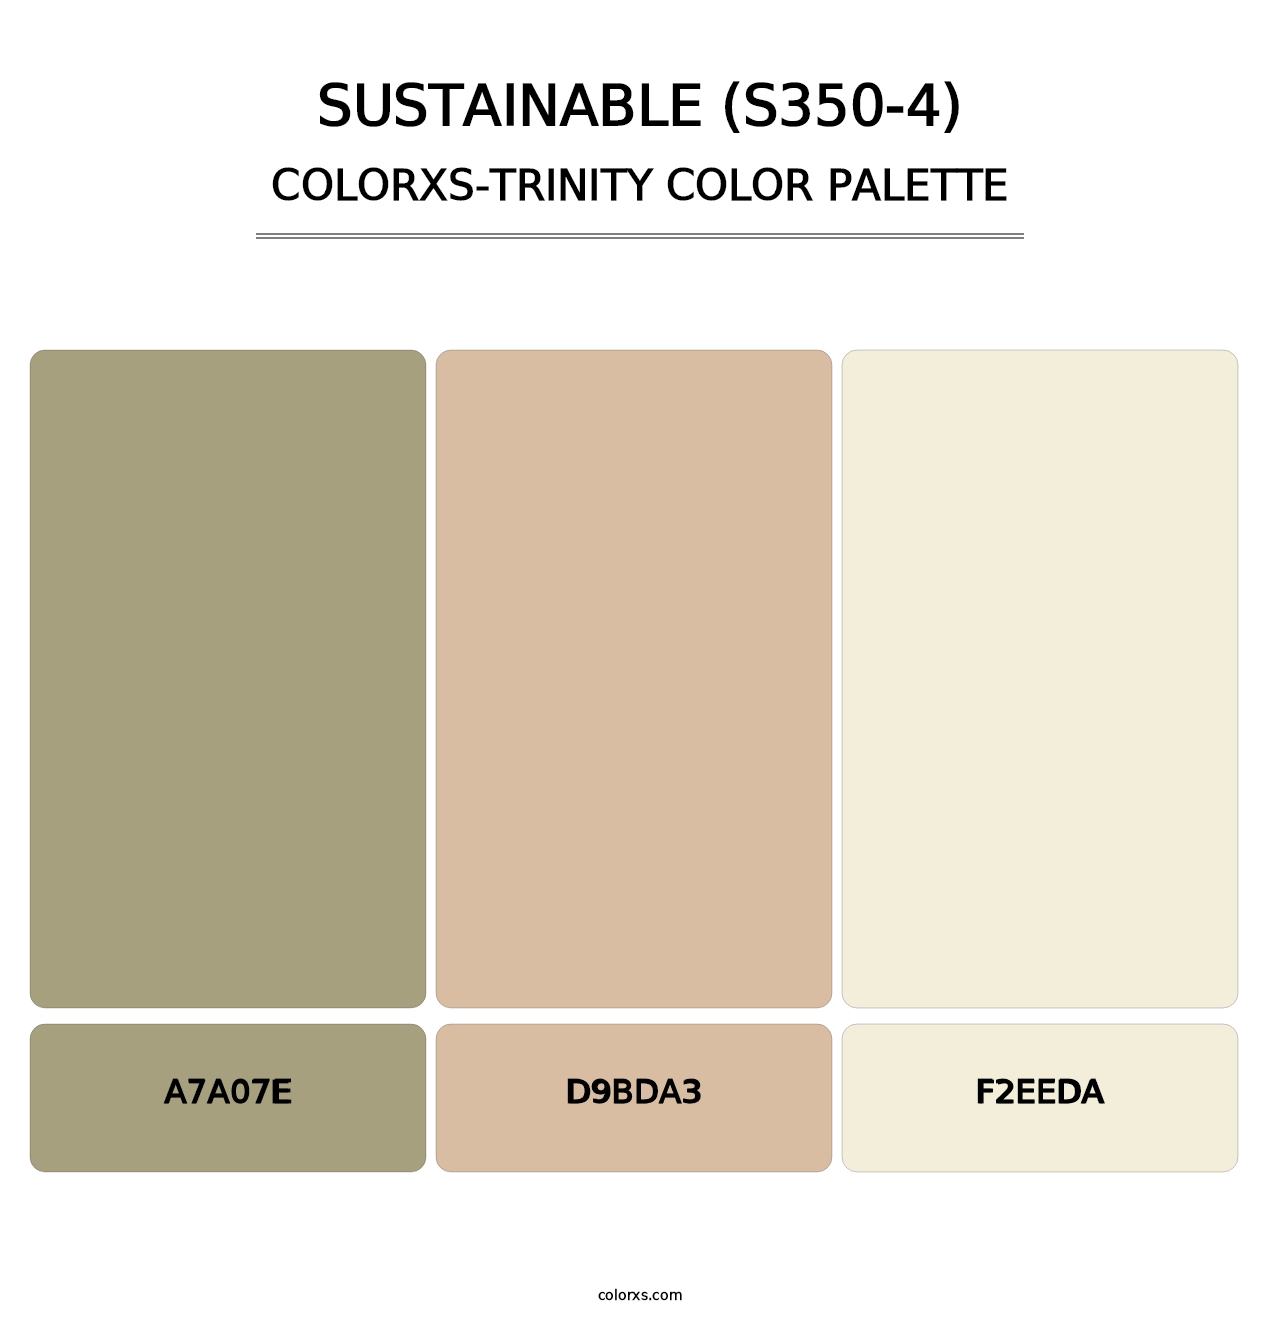 Sustainable (S350-4) - Colorxs Trinity Palette